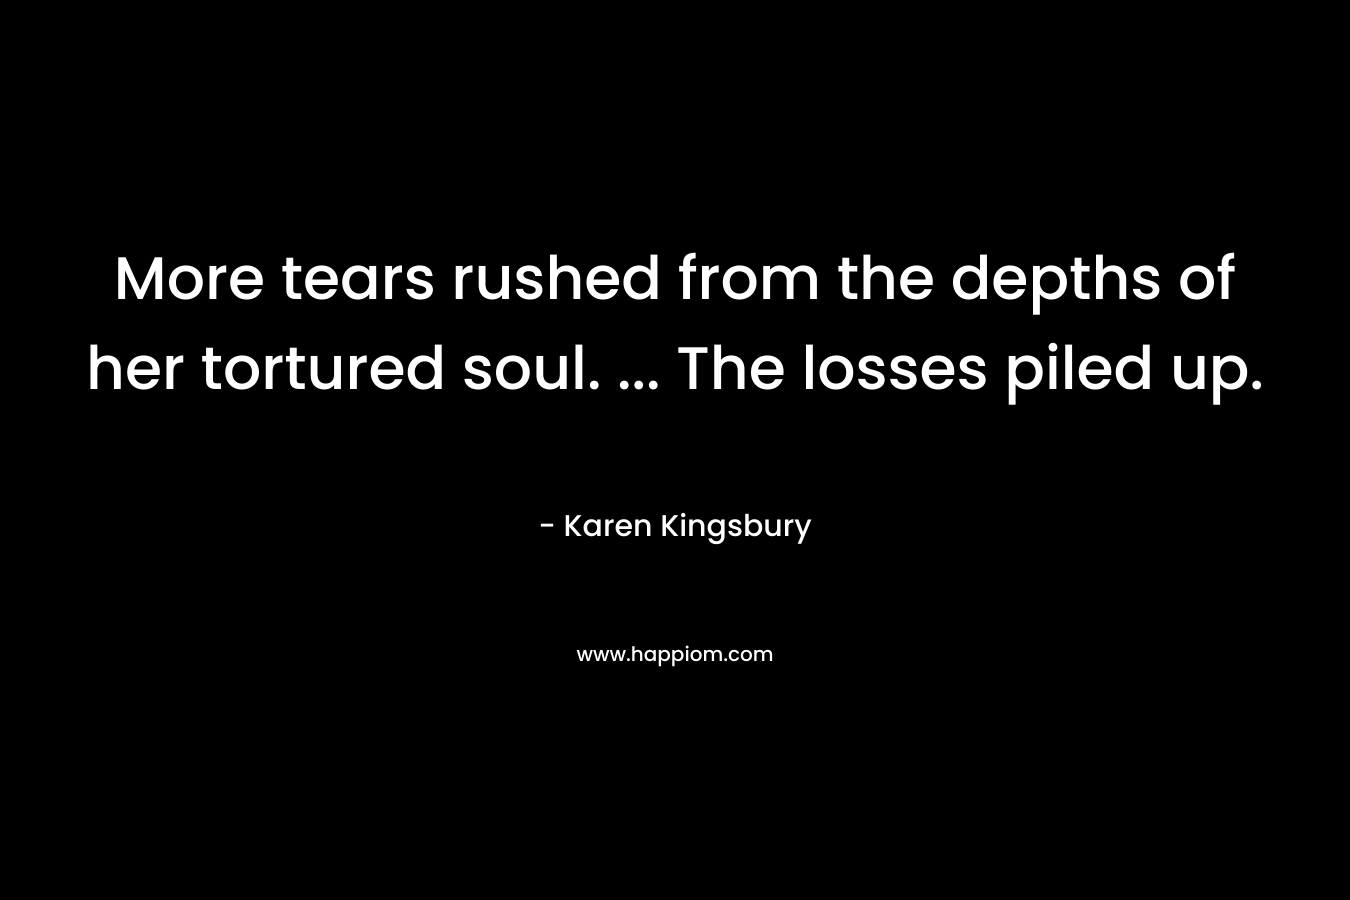 More tears rushed from the depths of her tortured soul. … The losses piled up. – Karen Kingsbury